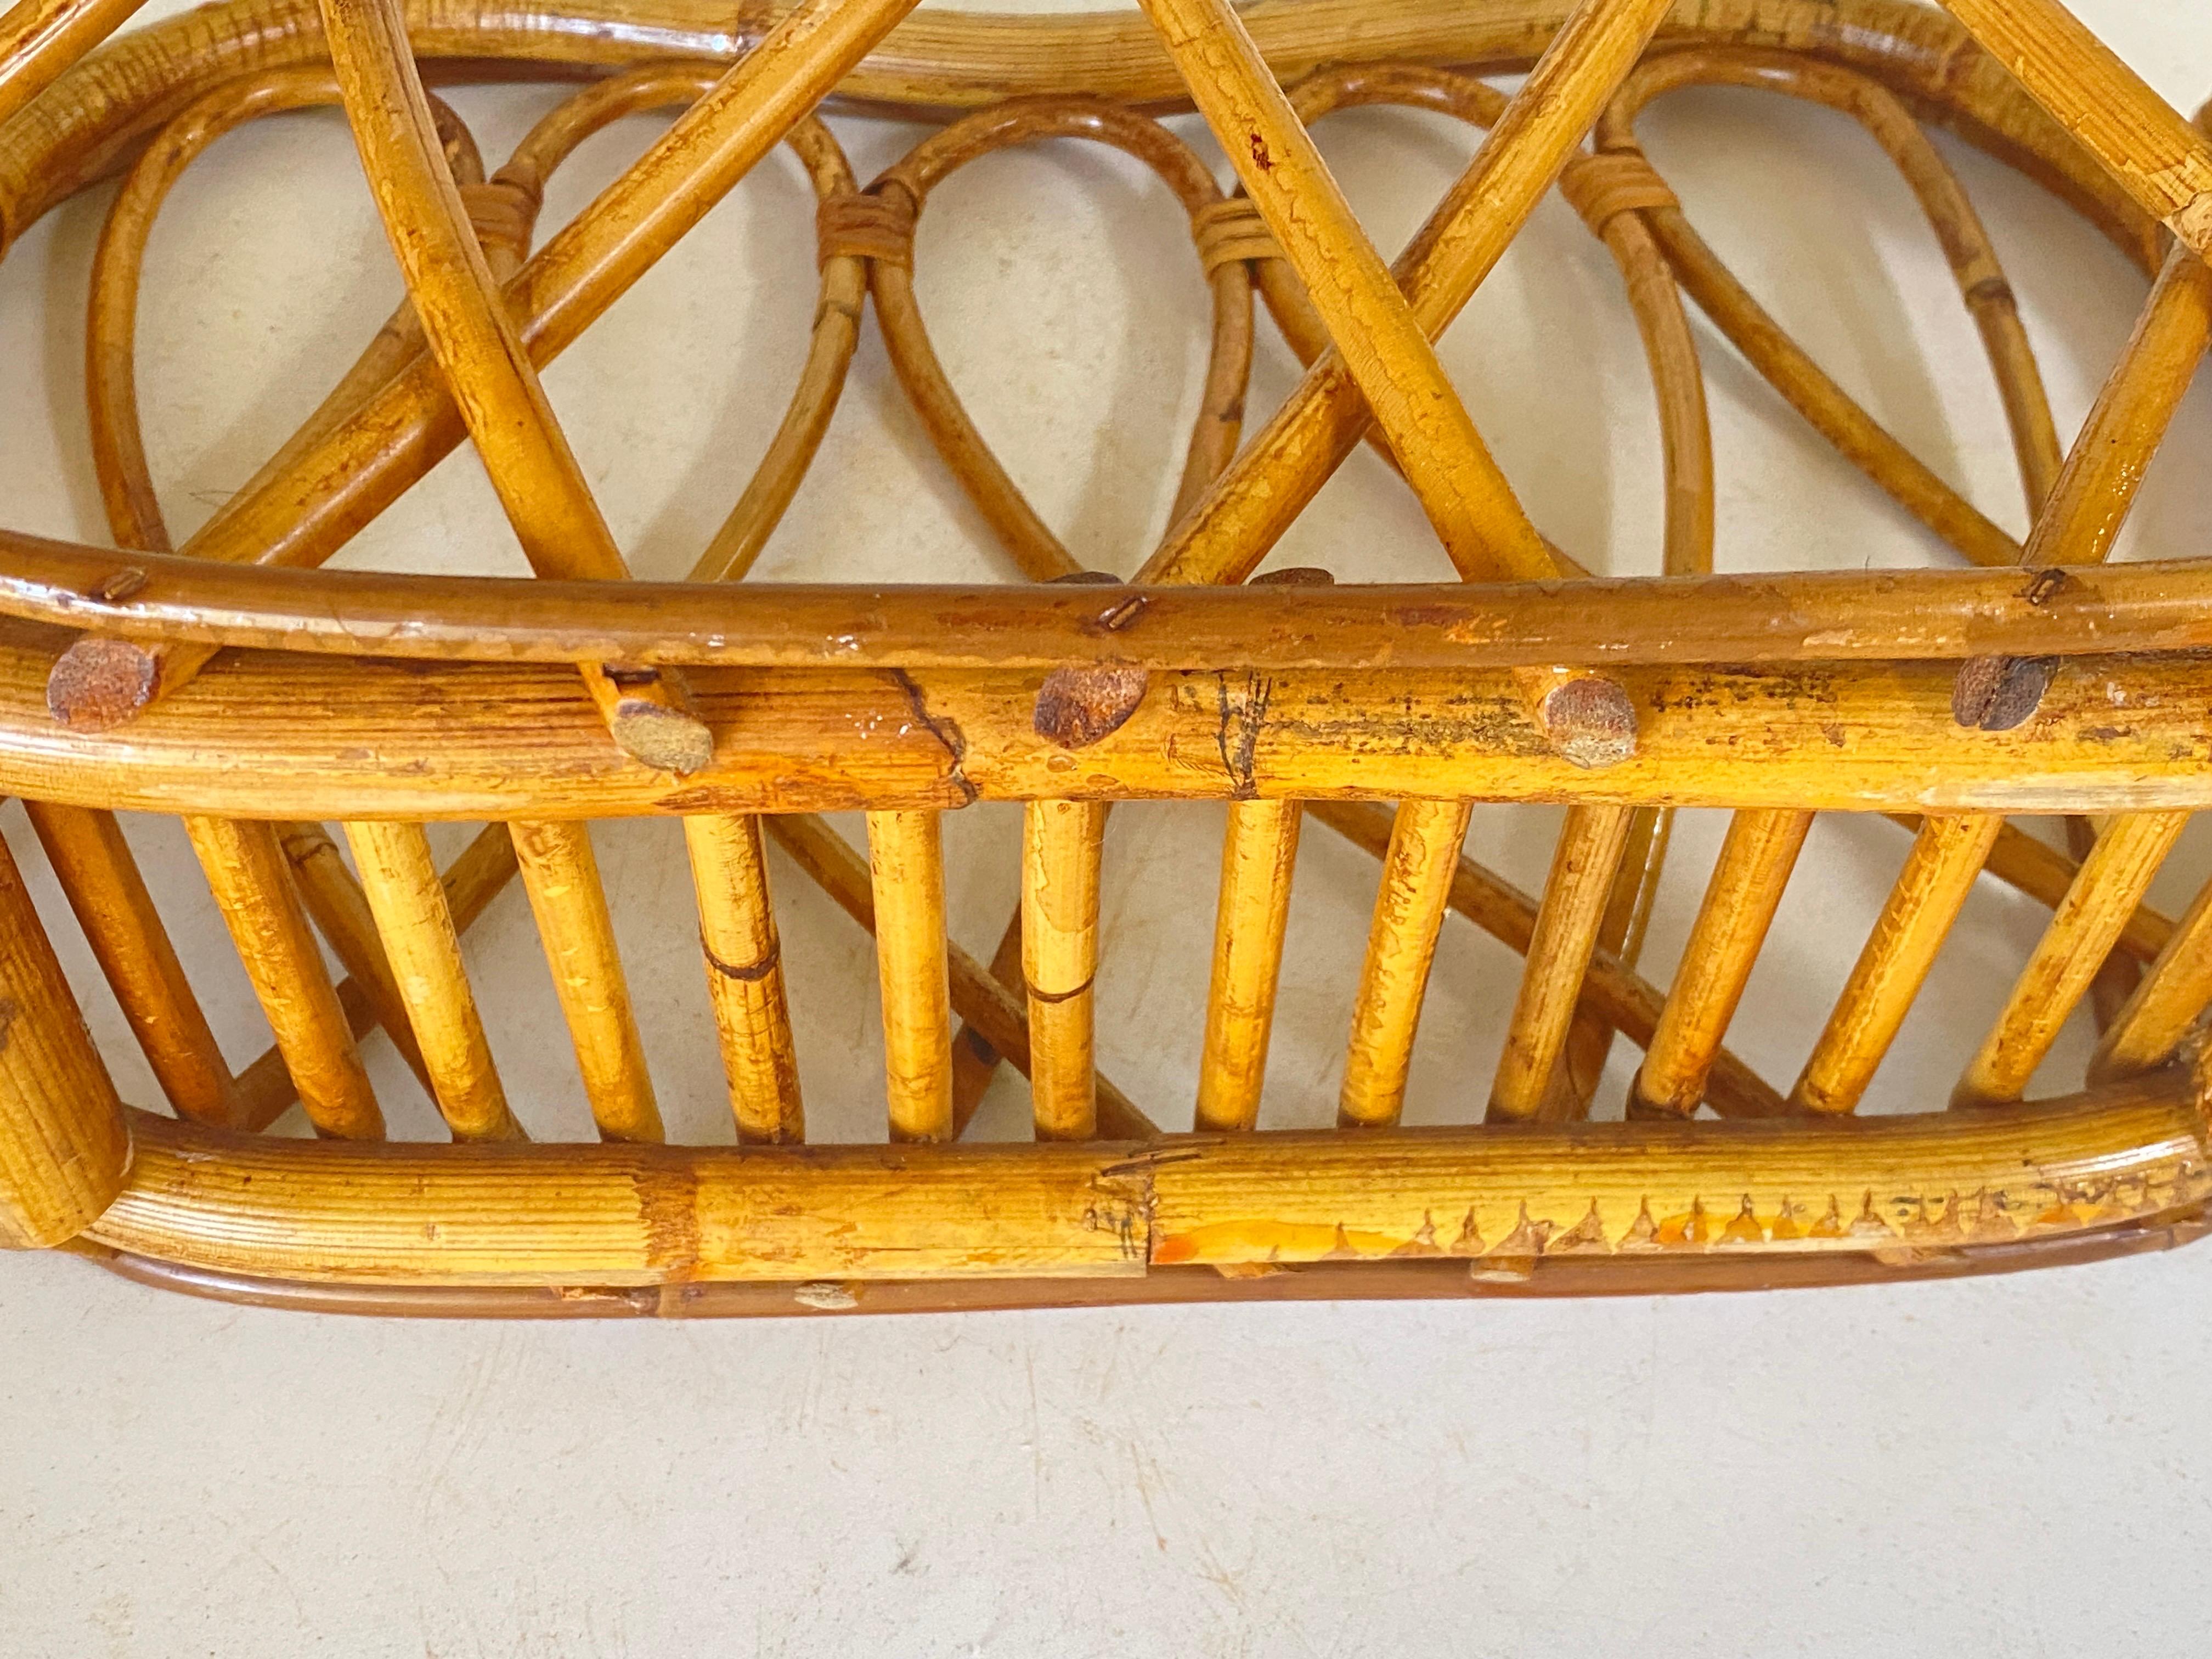 1960s Italian Vintage Mid-Century Modern Natural Rattan Wicker Magazine Holder In Good Condition For Sale In Auribeau sur Siagne, FR